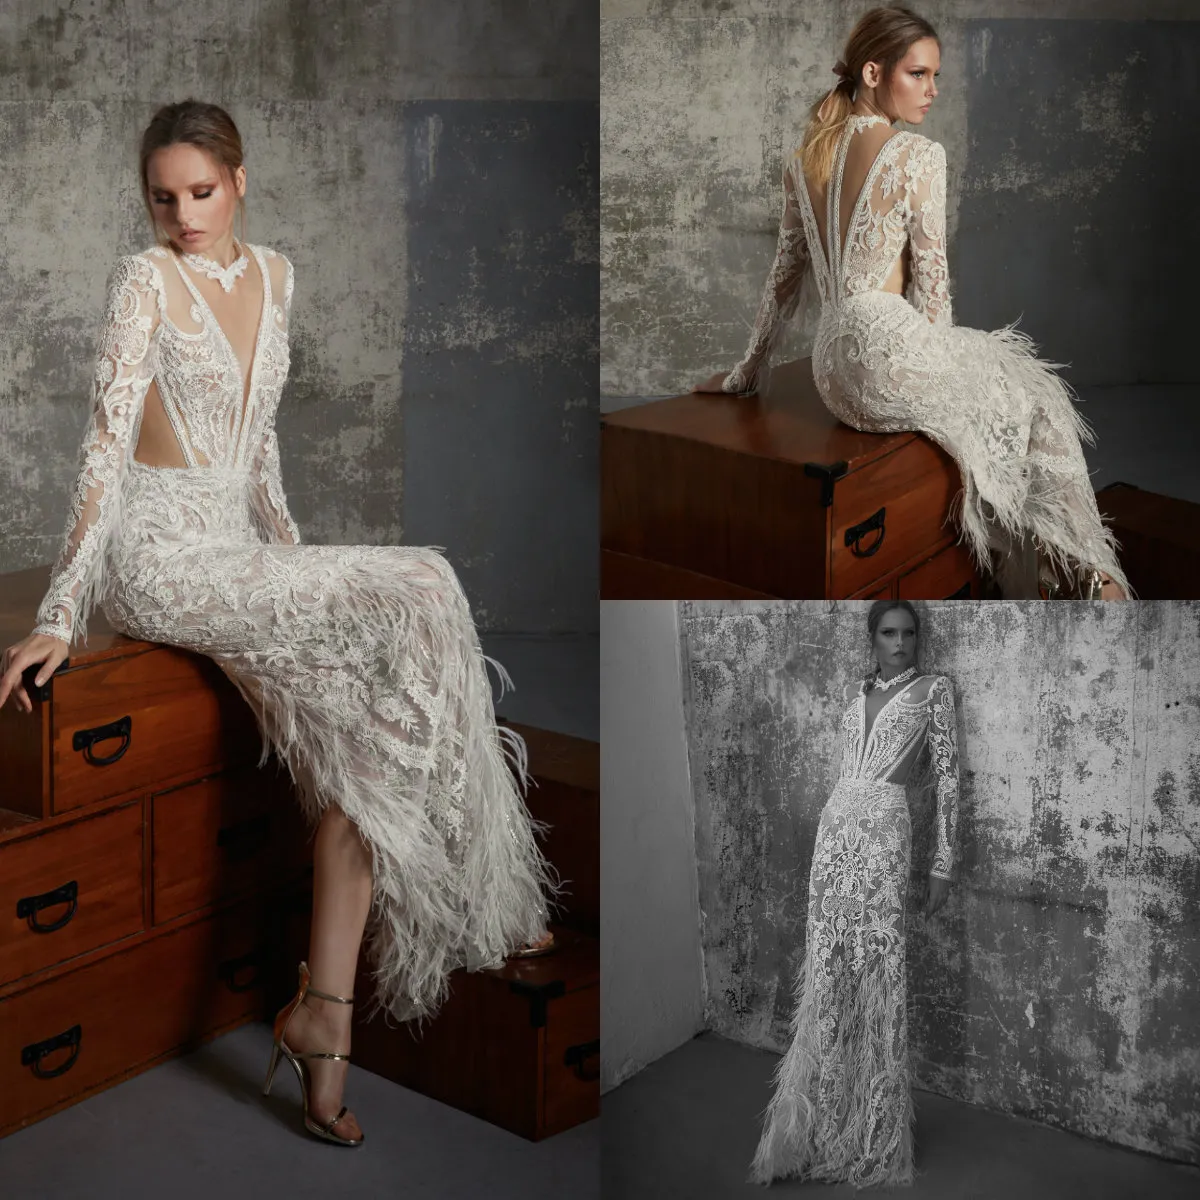 Lior Charchy Mermaid Wedding Dresses Jewel Neck Back Split Lace Appliques Feather Luxury Bridal Gowns Long Sleeve Beach Wedding Dr310F